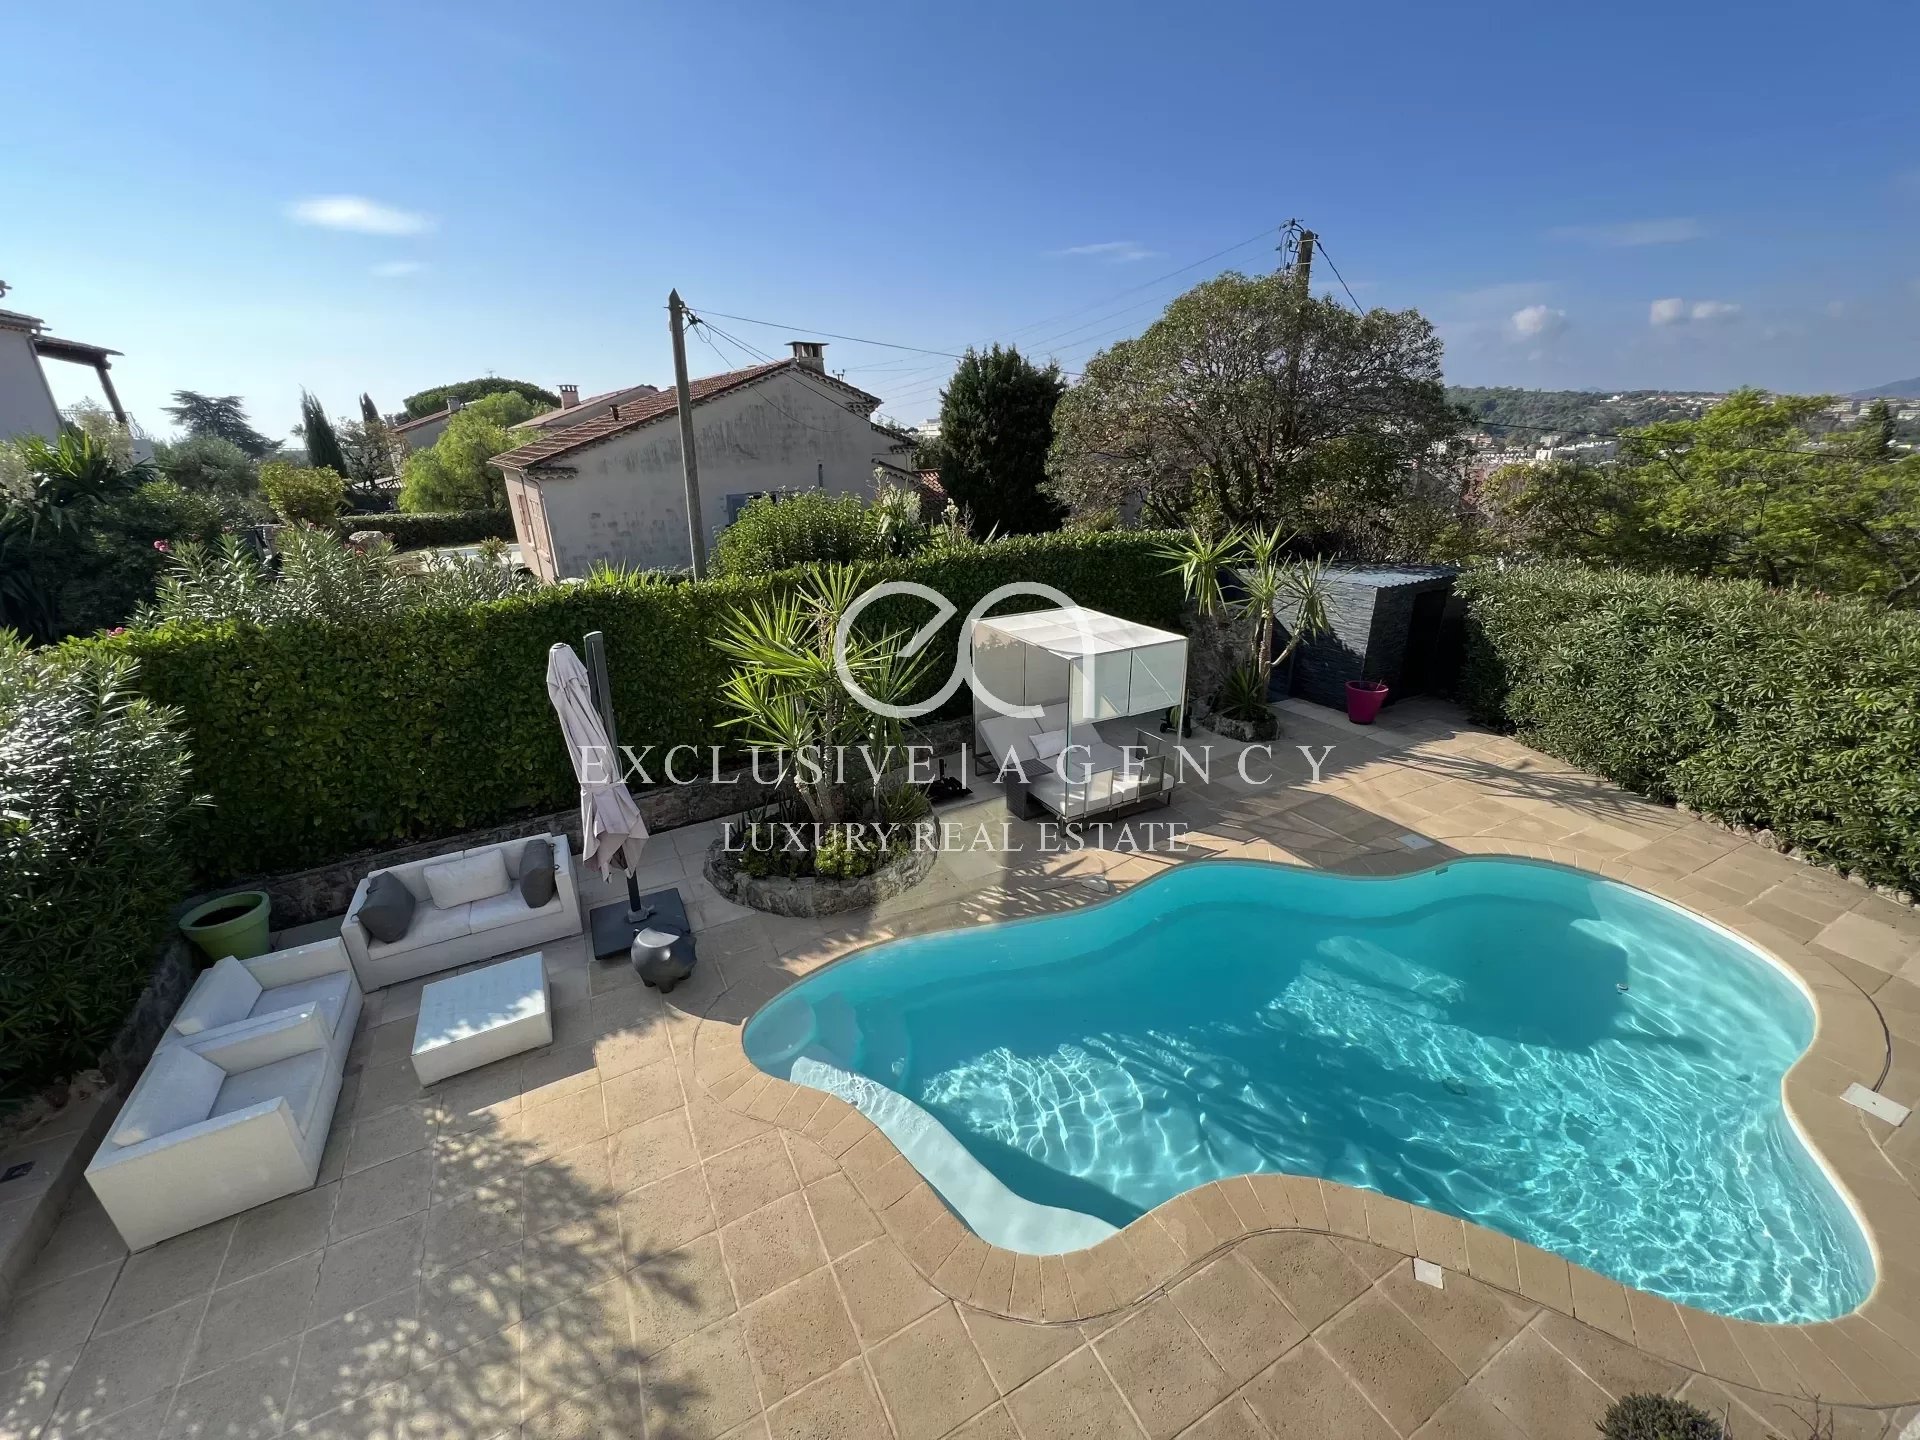 Le Cannet Europe, 220sqm villa with 5 bedrooms, garden, and pool.